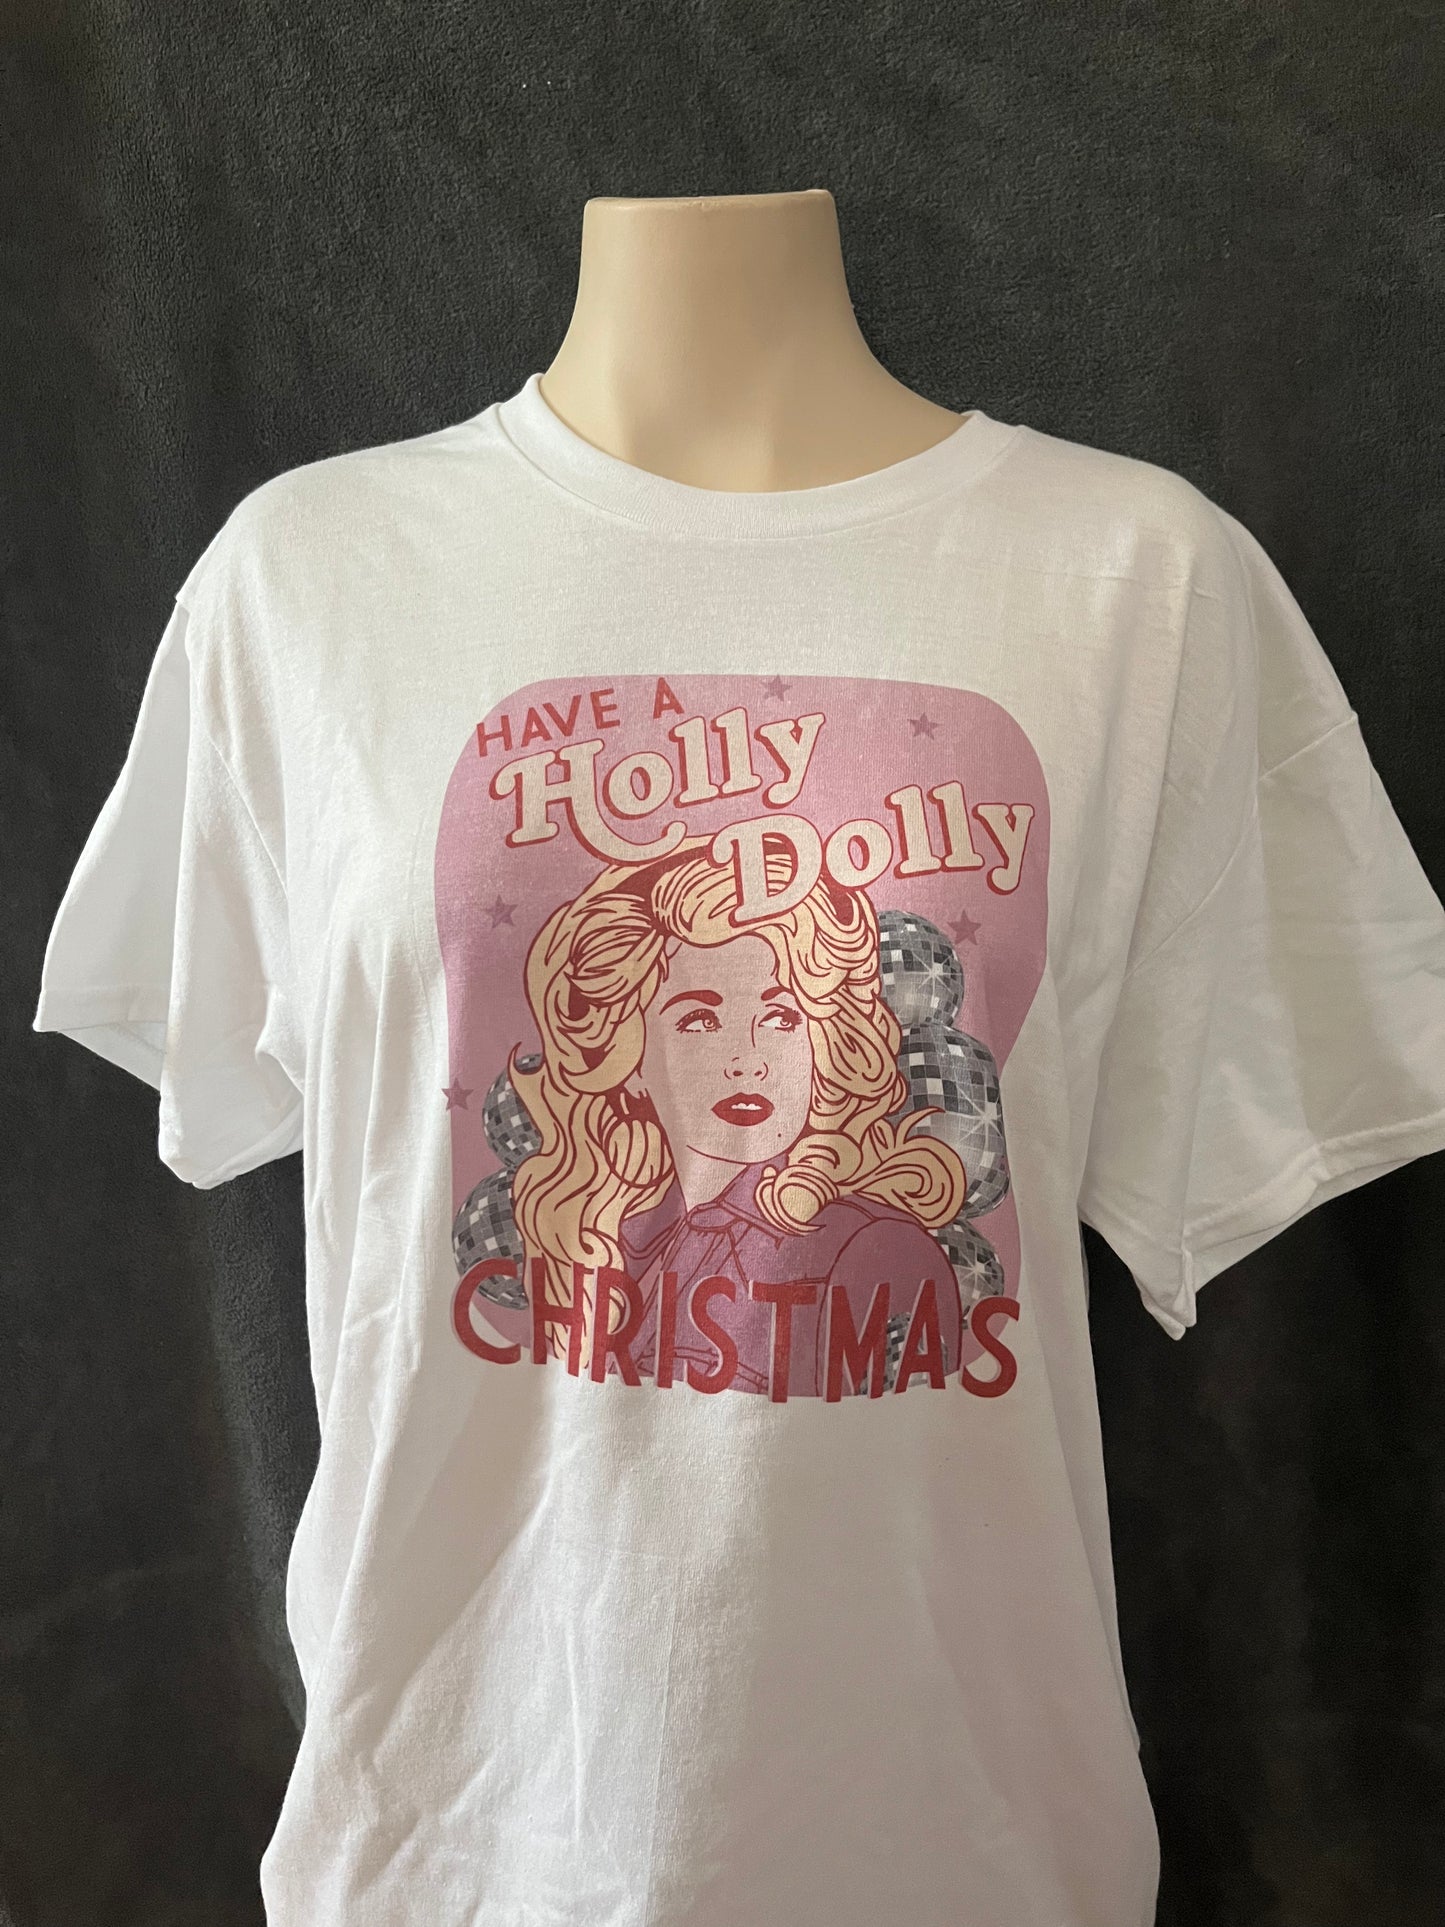 Have a Holly Dolly Christmas Graphic T-shirt